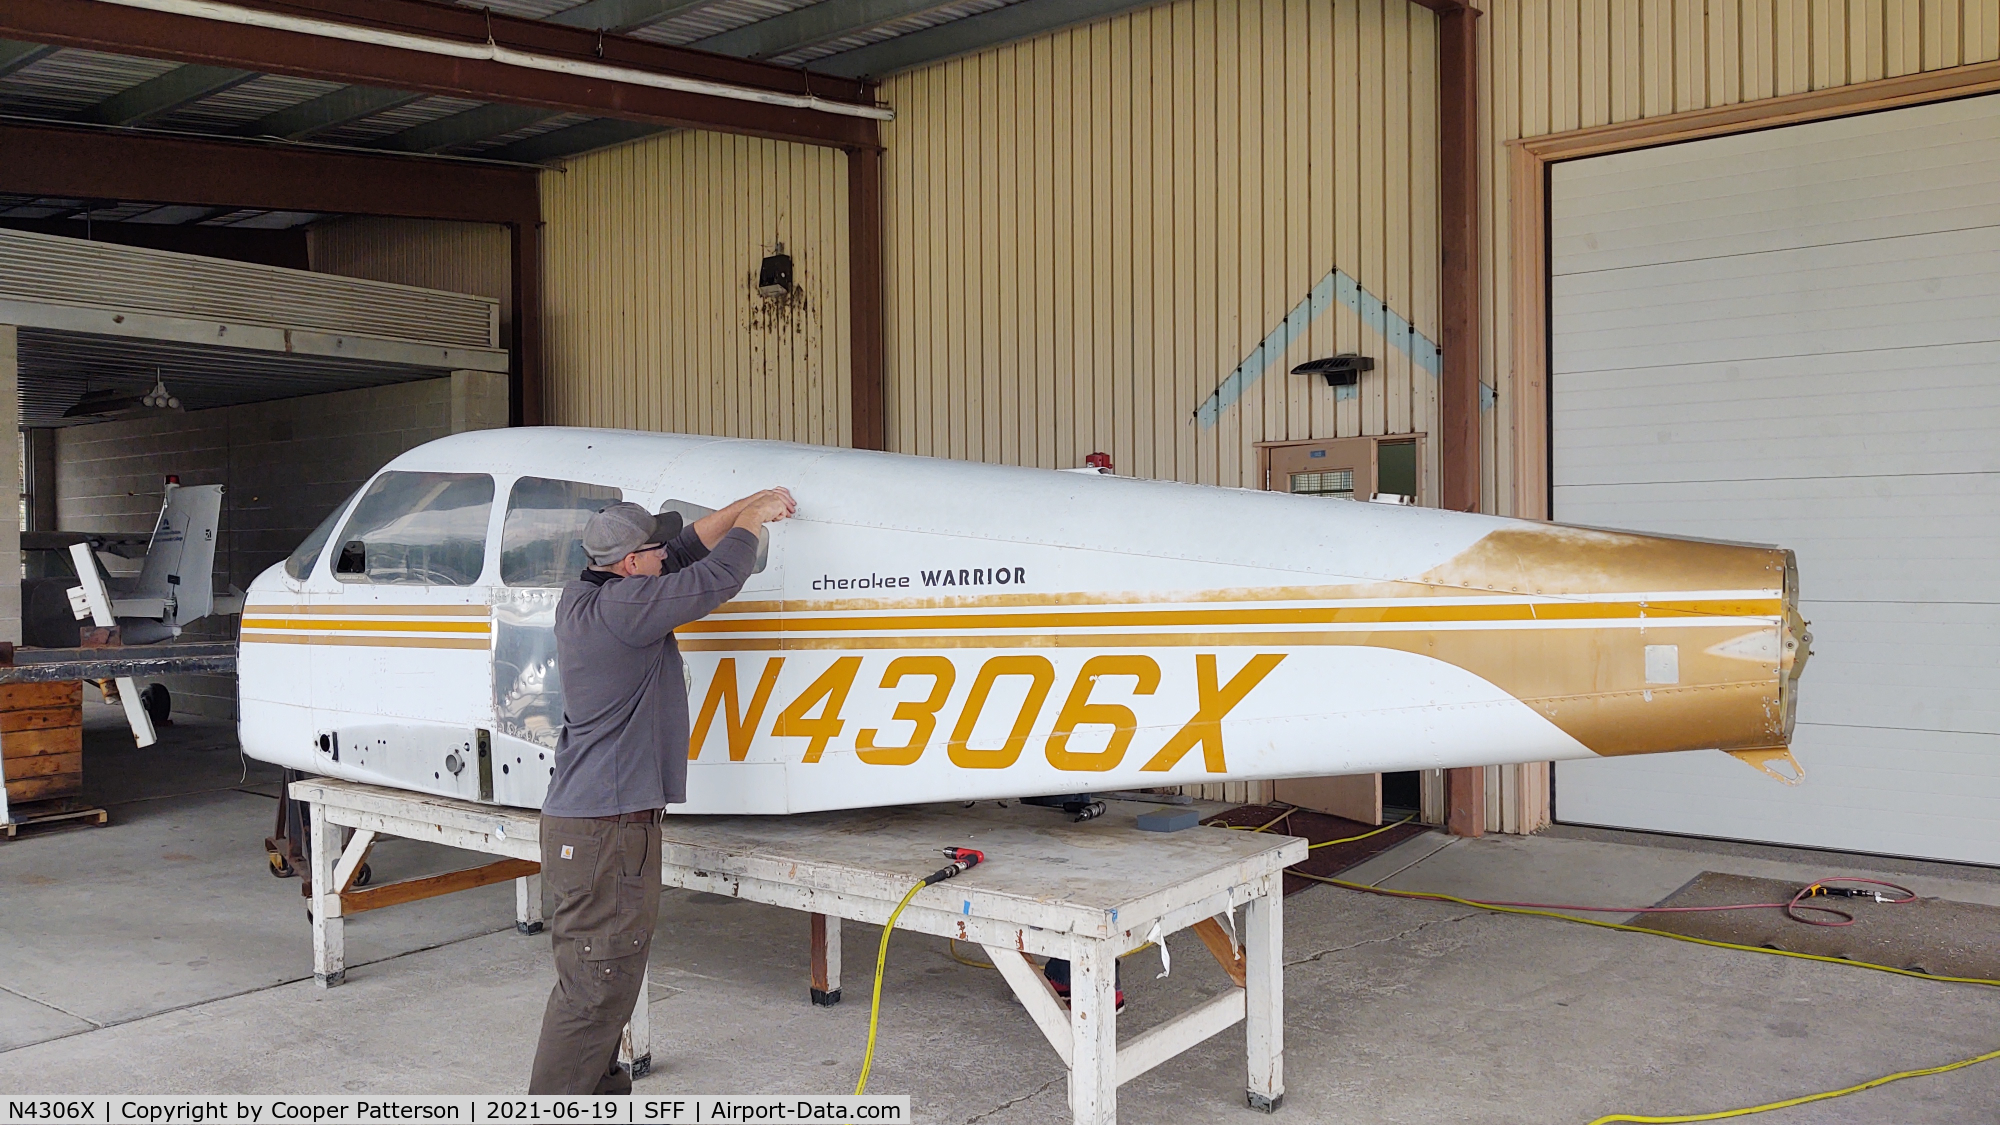 N4306X, 1975 Piper PA-28-151 C/N 28-7515442, The airframe is currently at Spokane Community College's Aviation Maintenance building, being disassembled and utilized as a structural repair trainer.